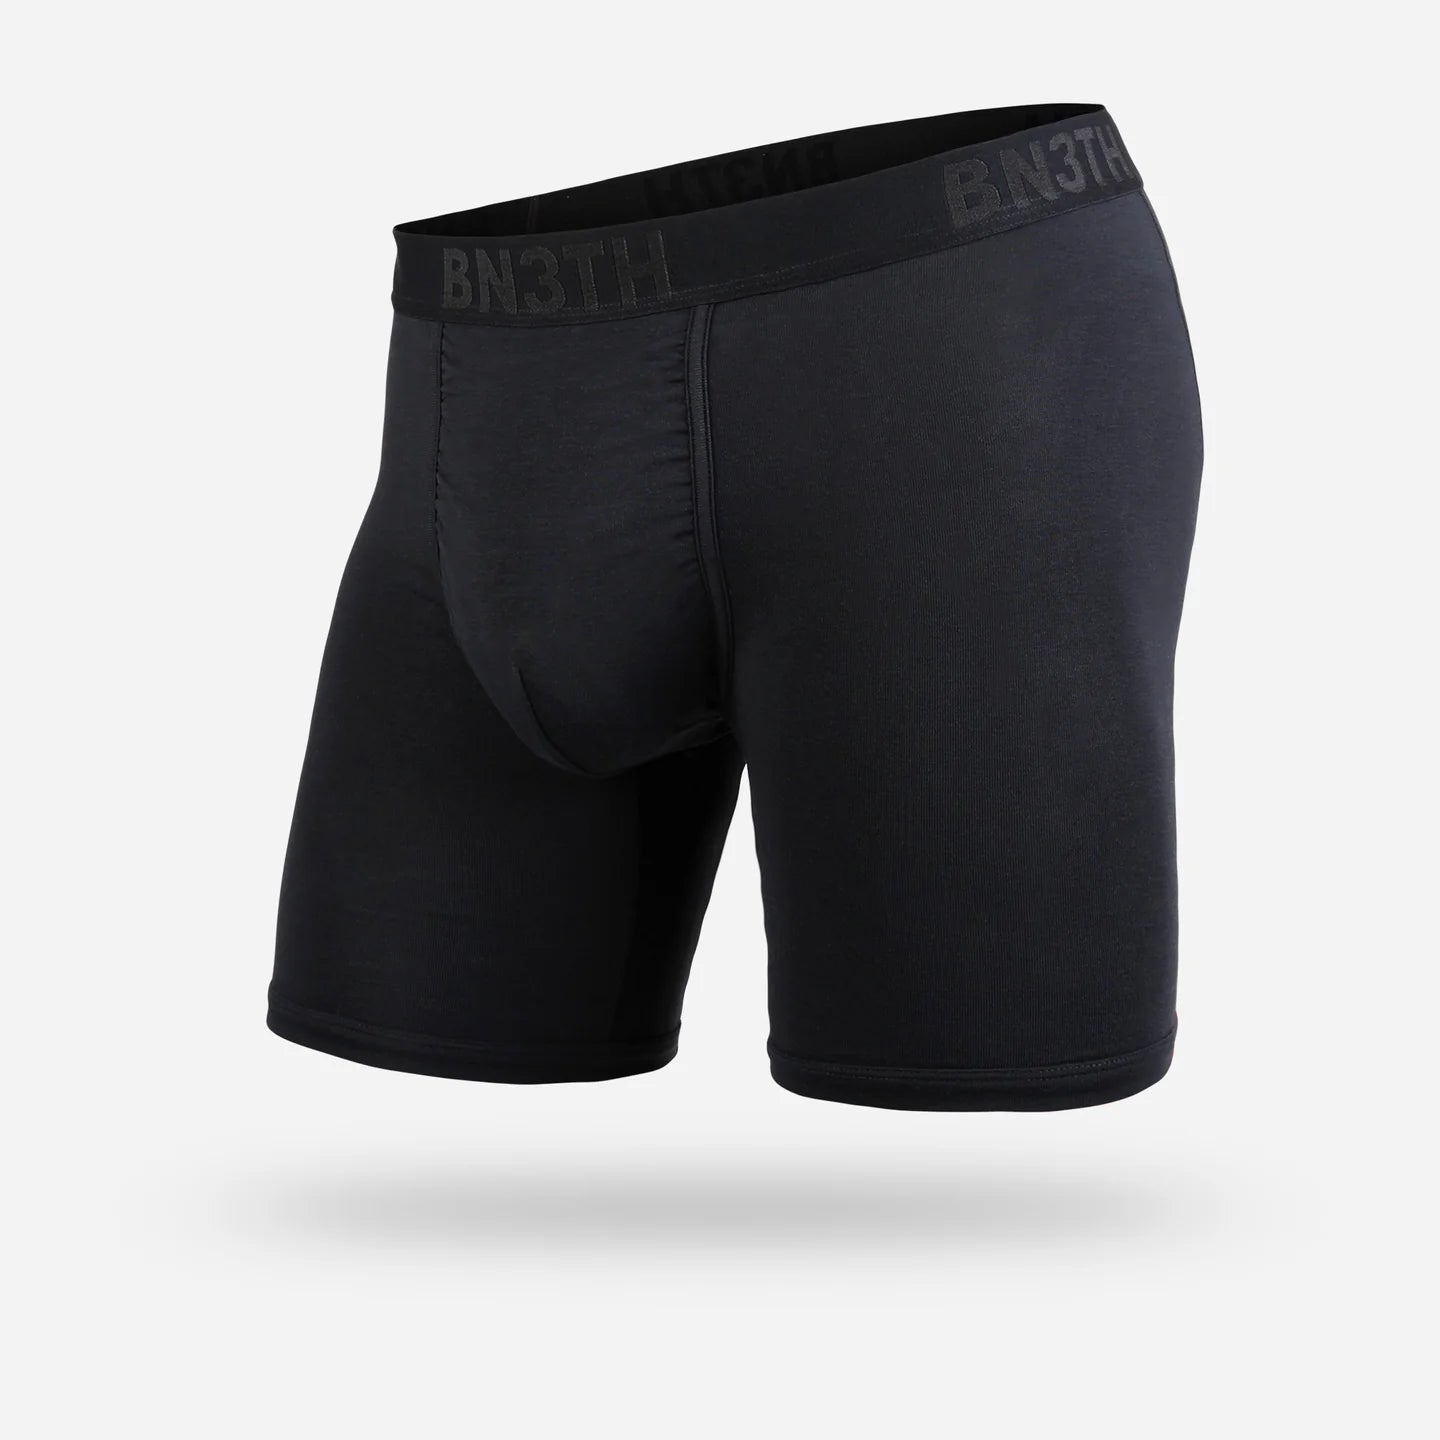 BN3TH Classic Boxer Brief Solid - One Stop Equine Shop